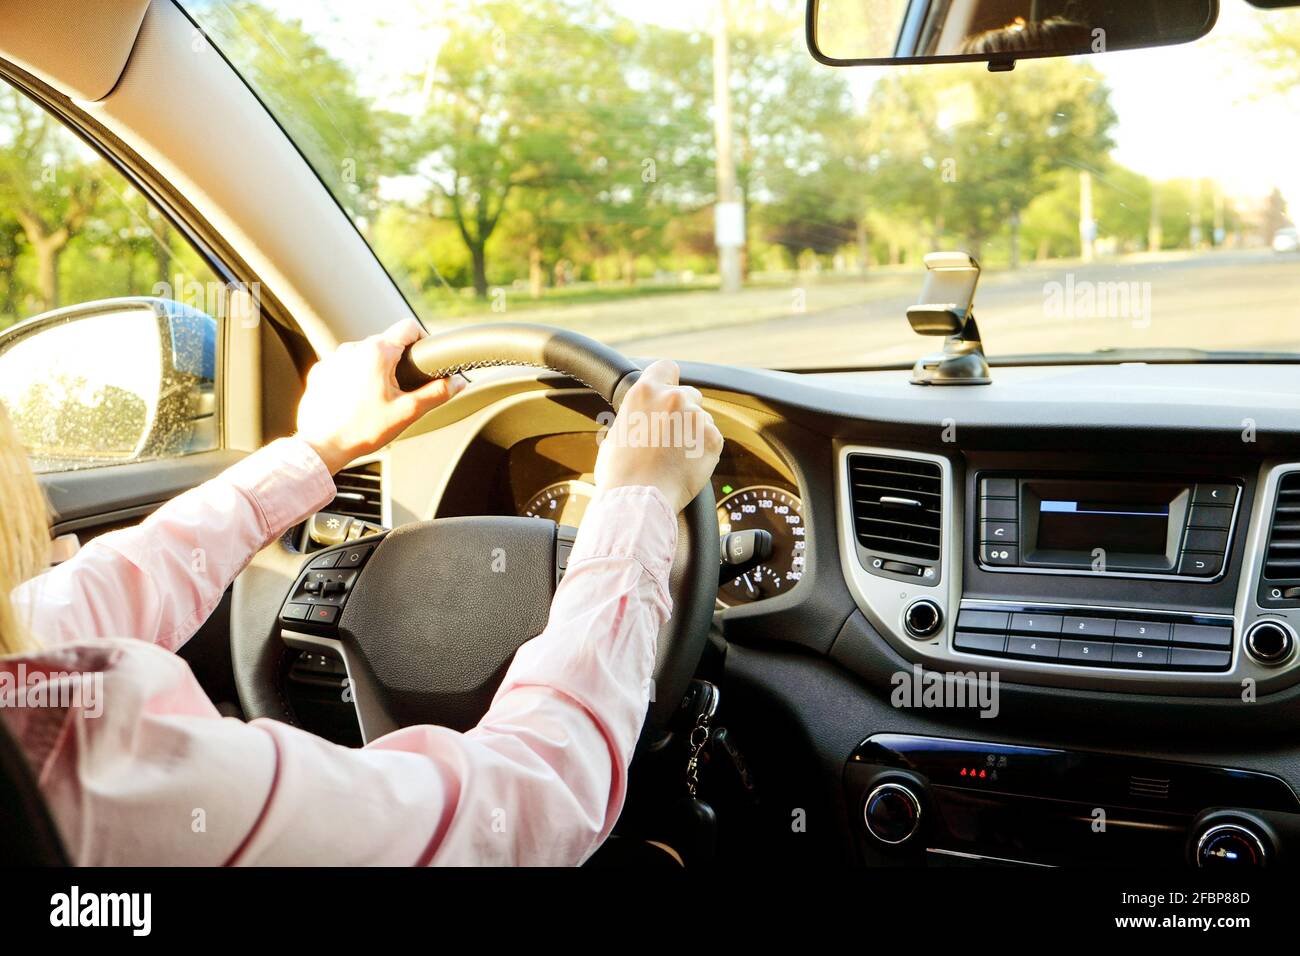 Close up of young woman hands holding steering wheel while driving car. Dashboard panel, phone holder mount, windshield. Businesswoman man inside vehi Stock Photo